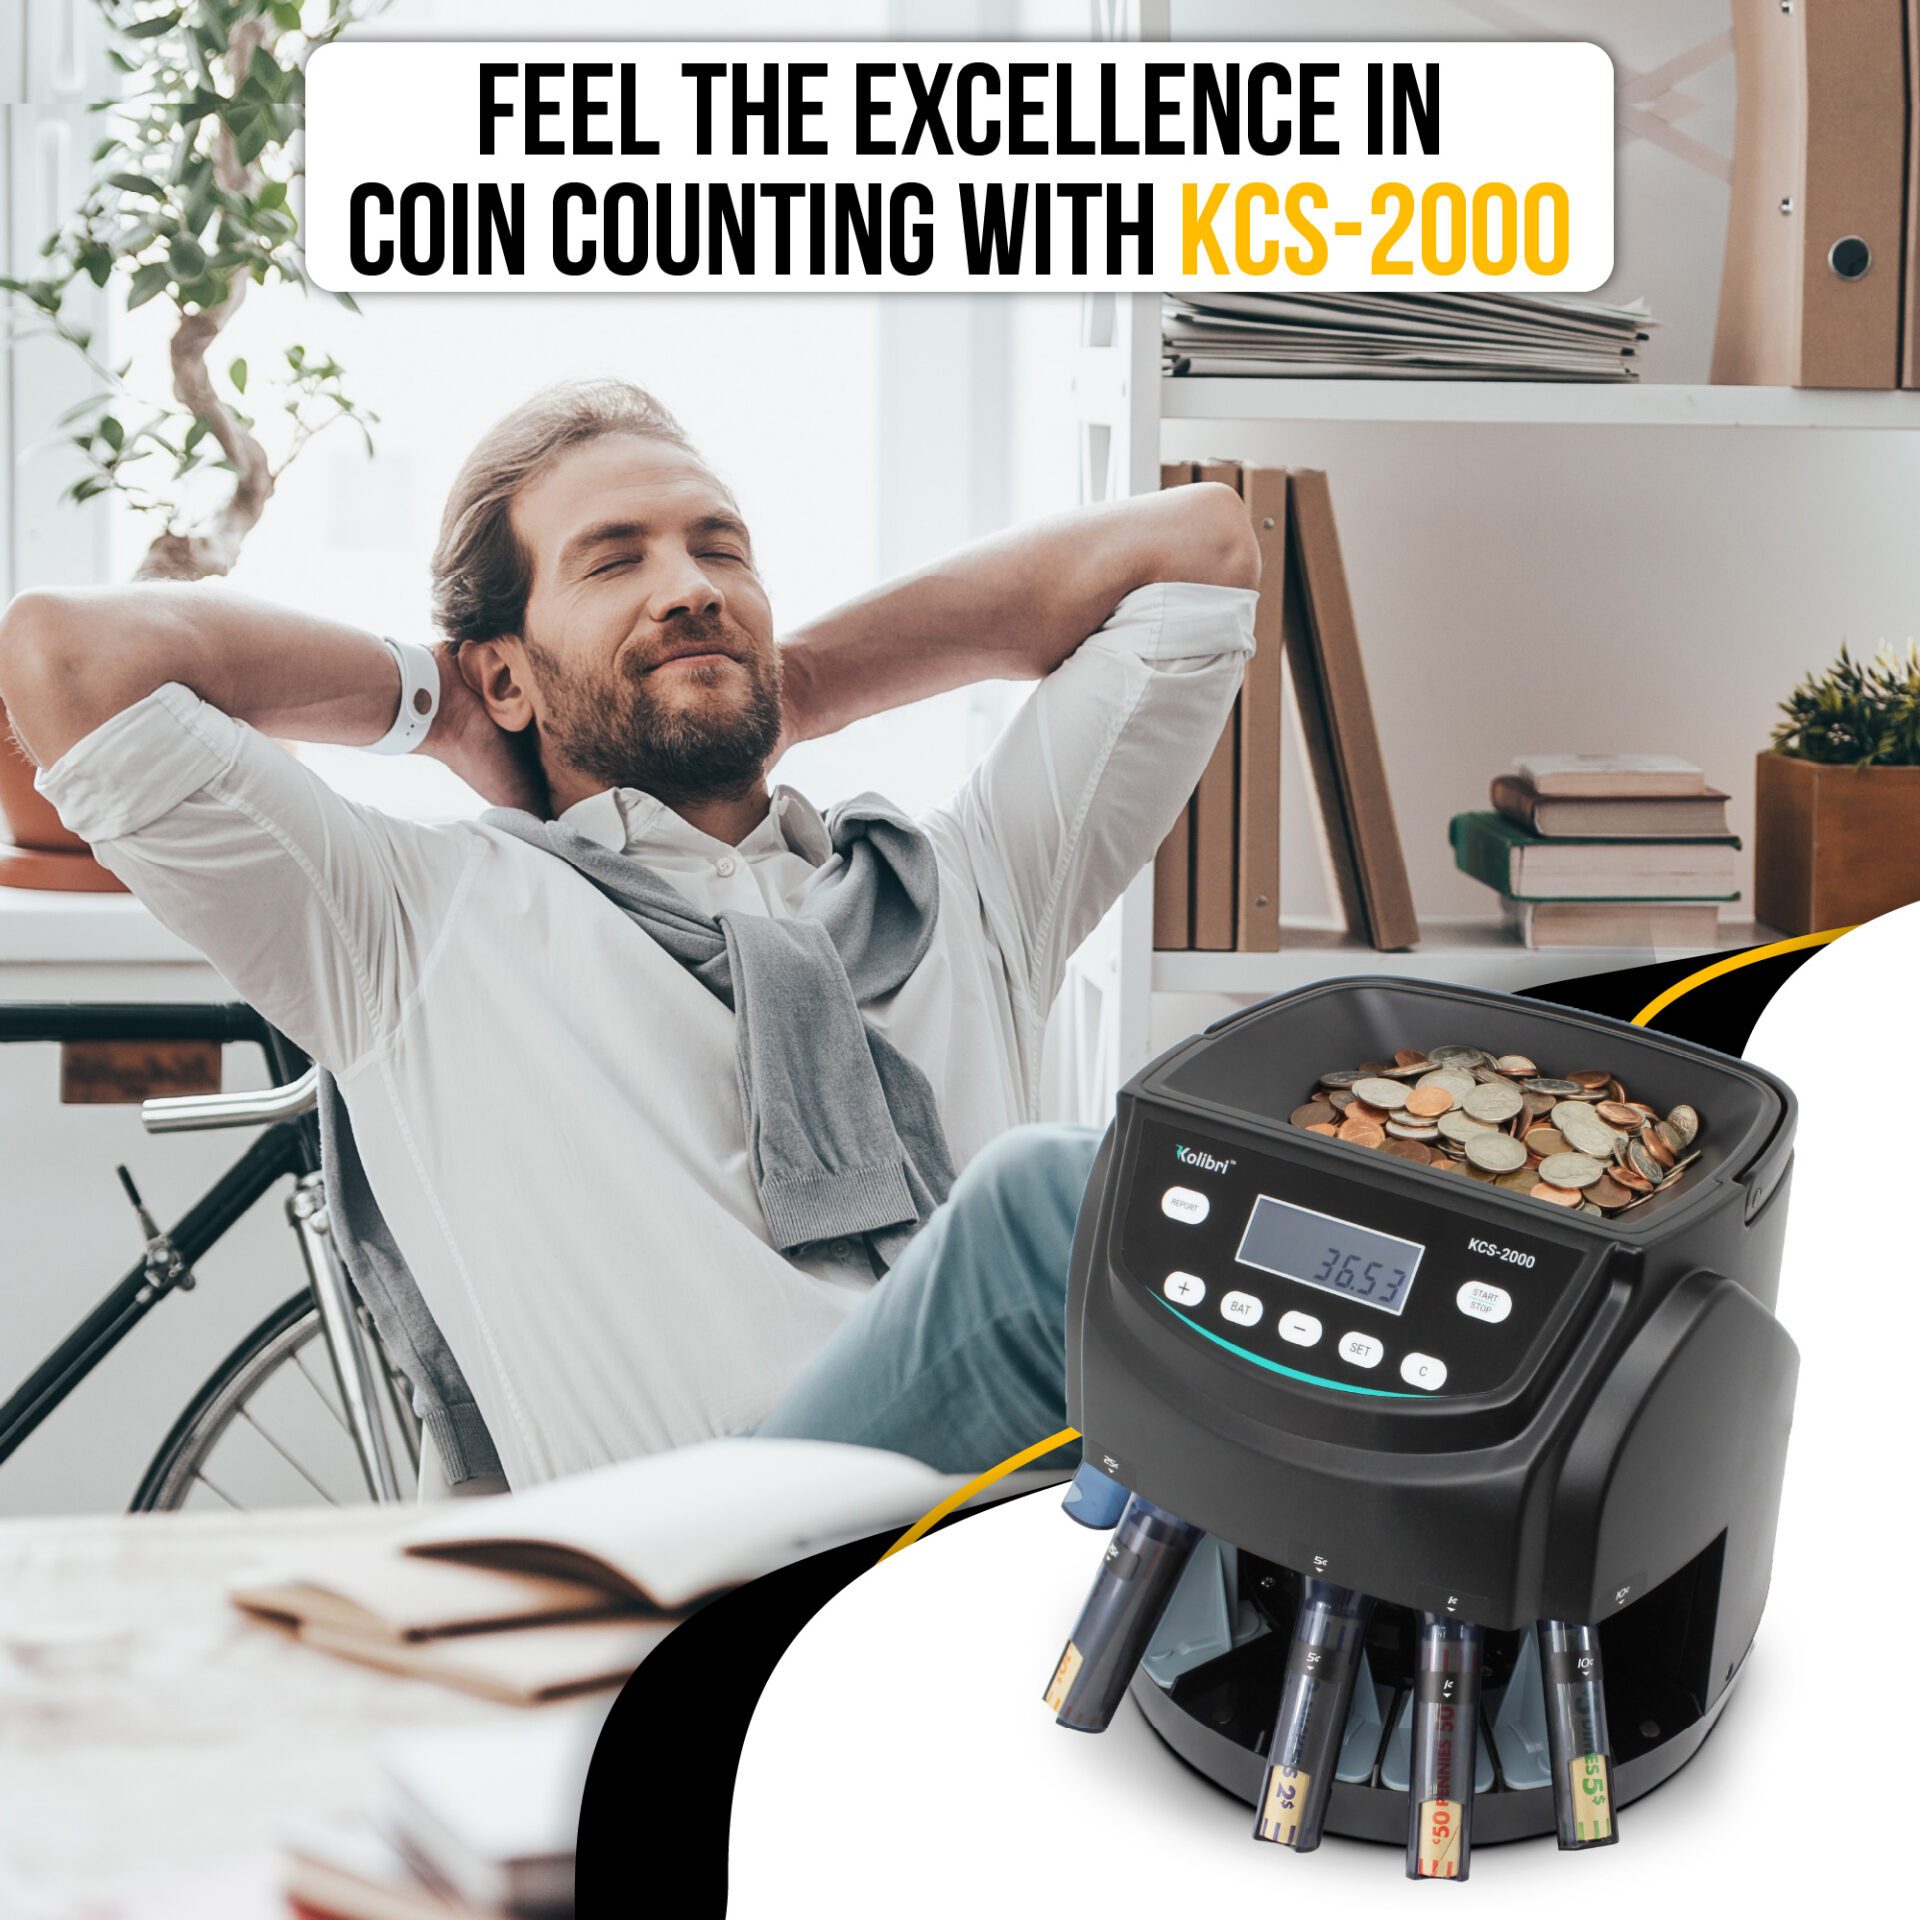 Feel the Excellence in Coin Counting with KCS-2000